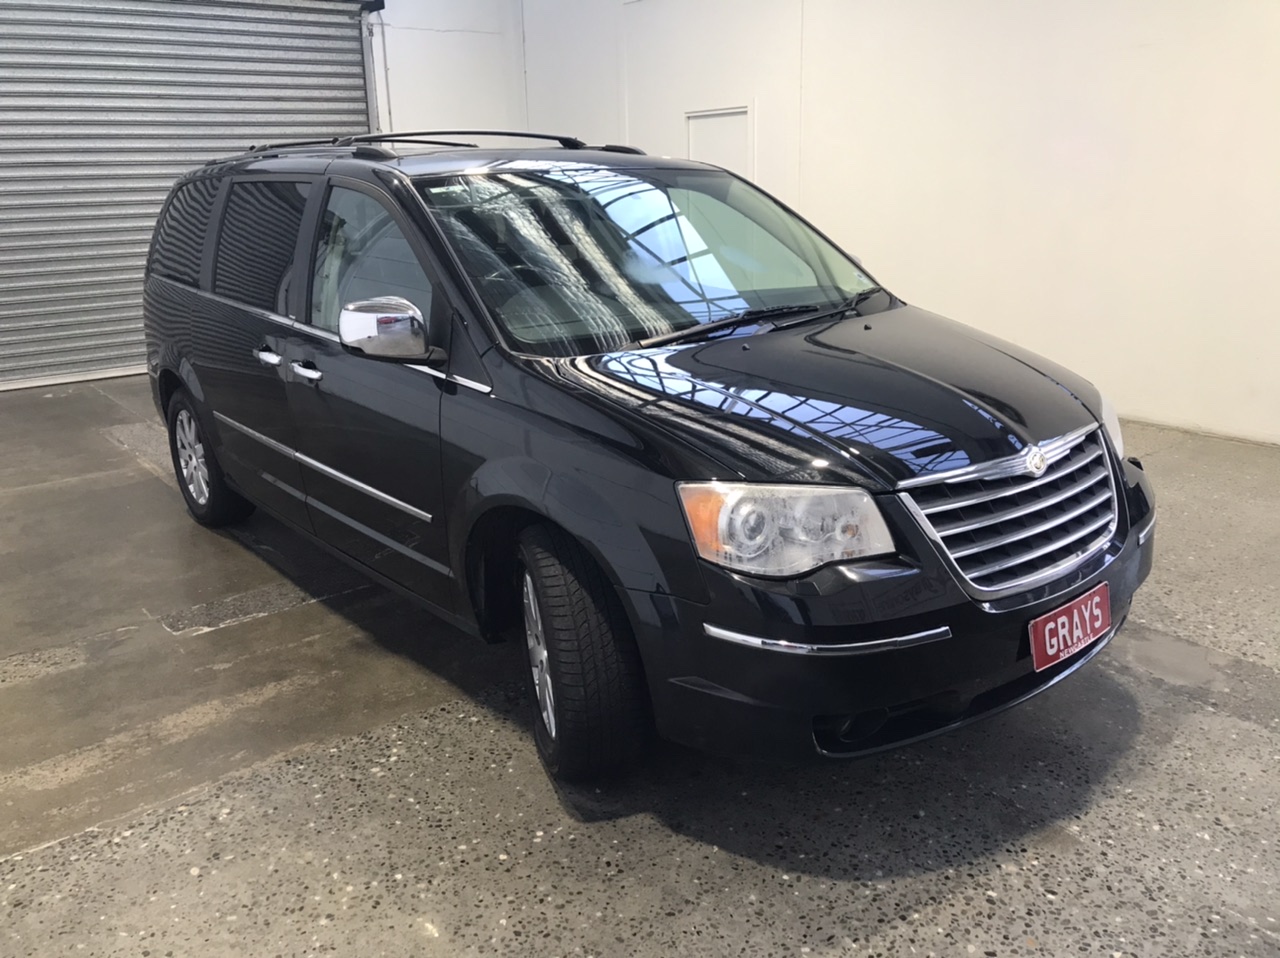 2010 Chrysler Grand Voyager Limited RT Automatic 7 Seats